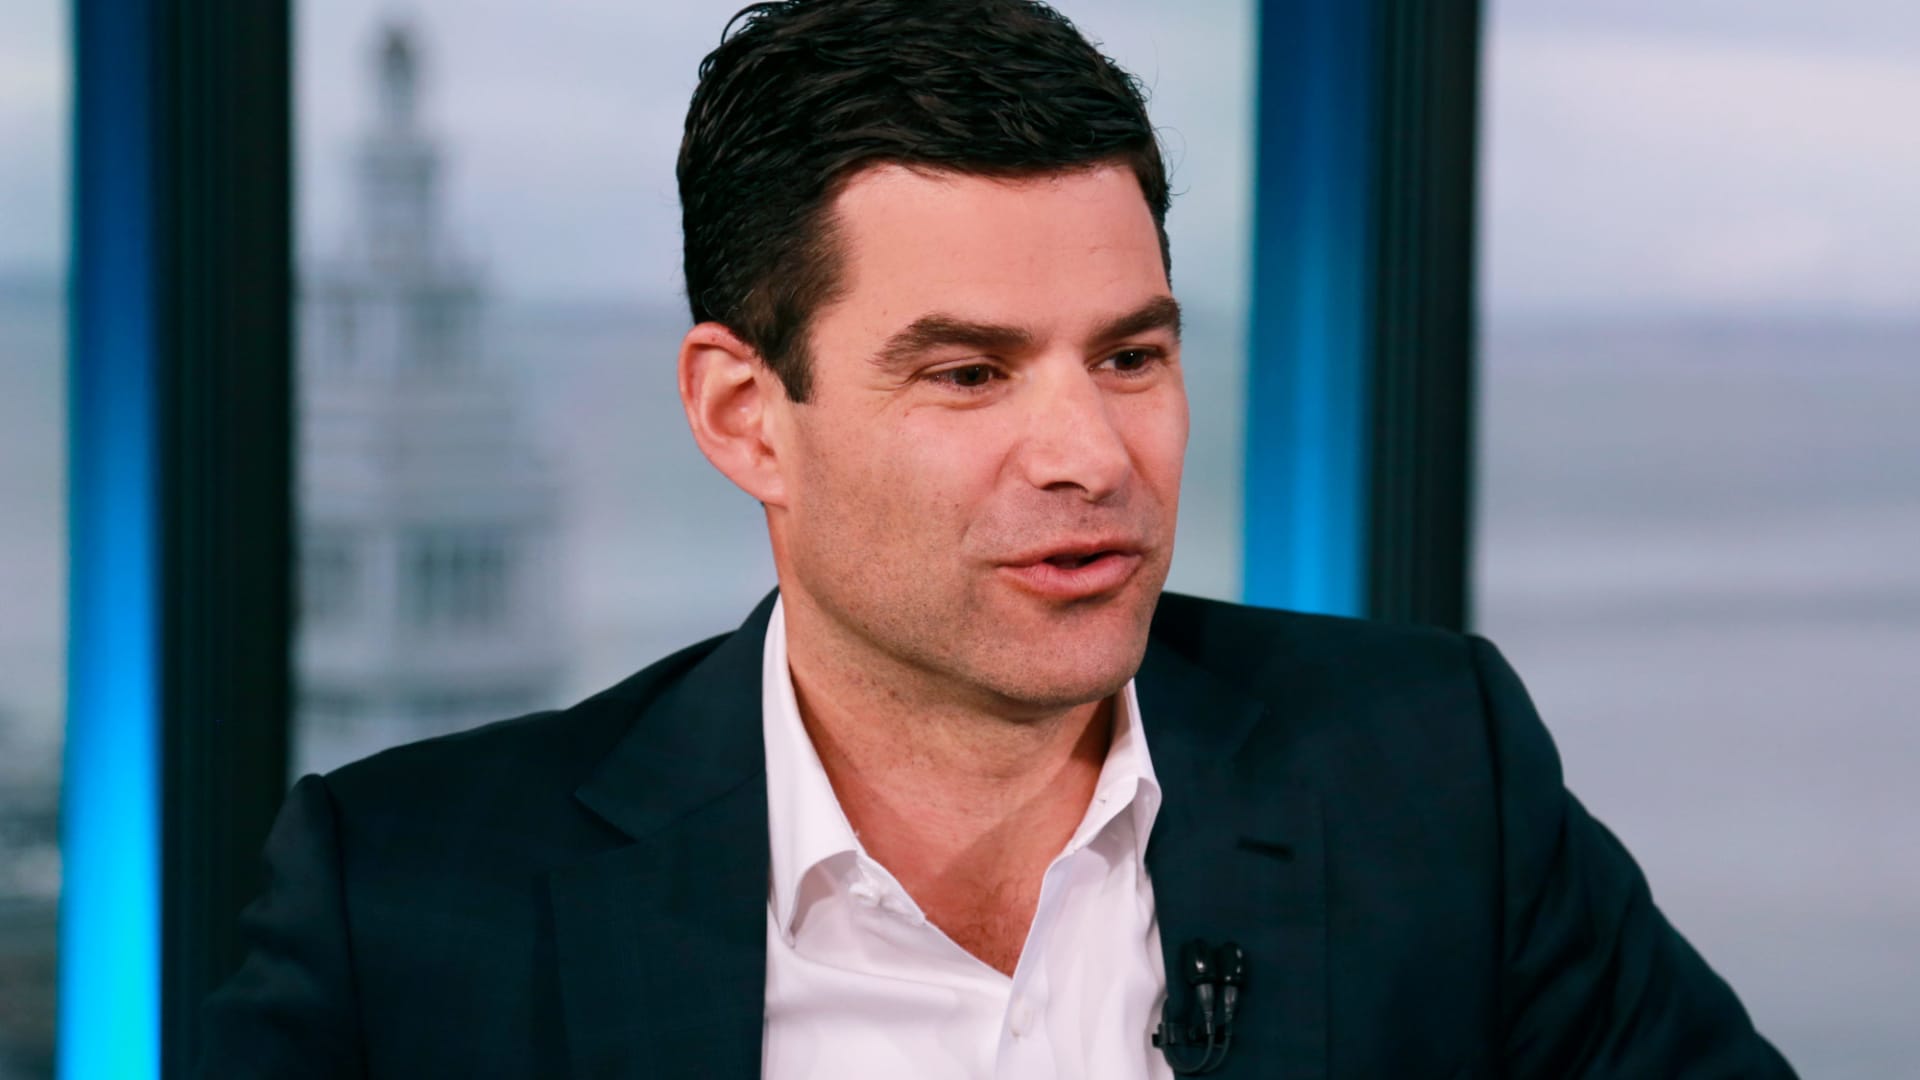 Twitter's Chief Financial Officer, Ned Segal